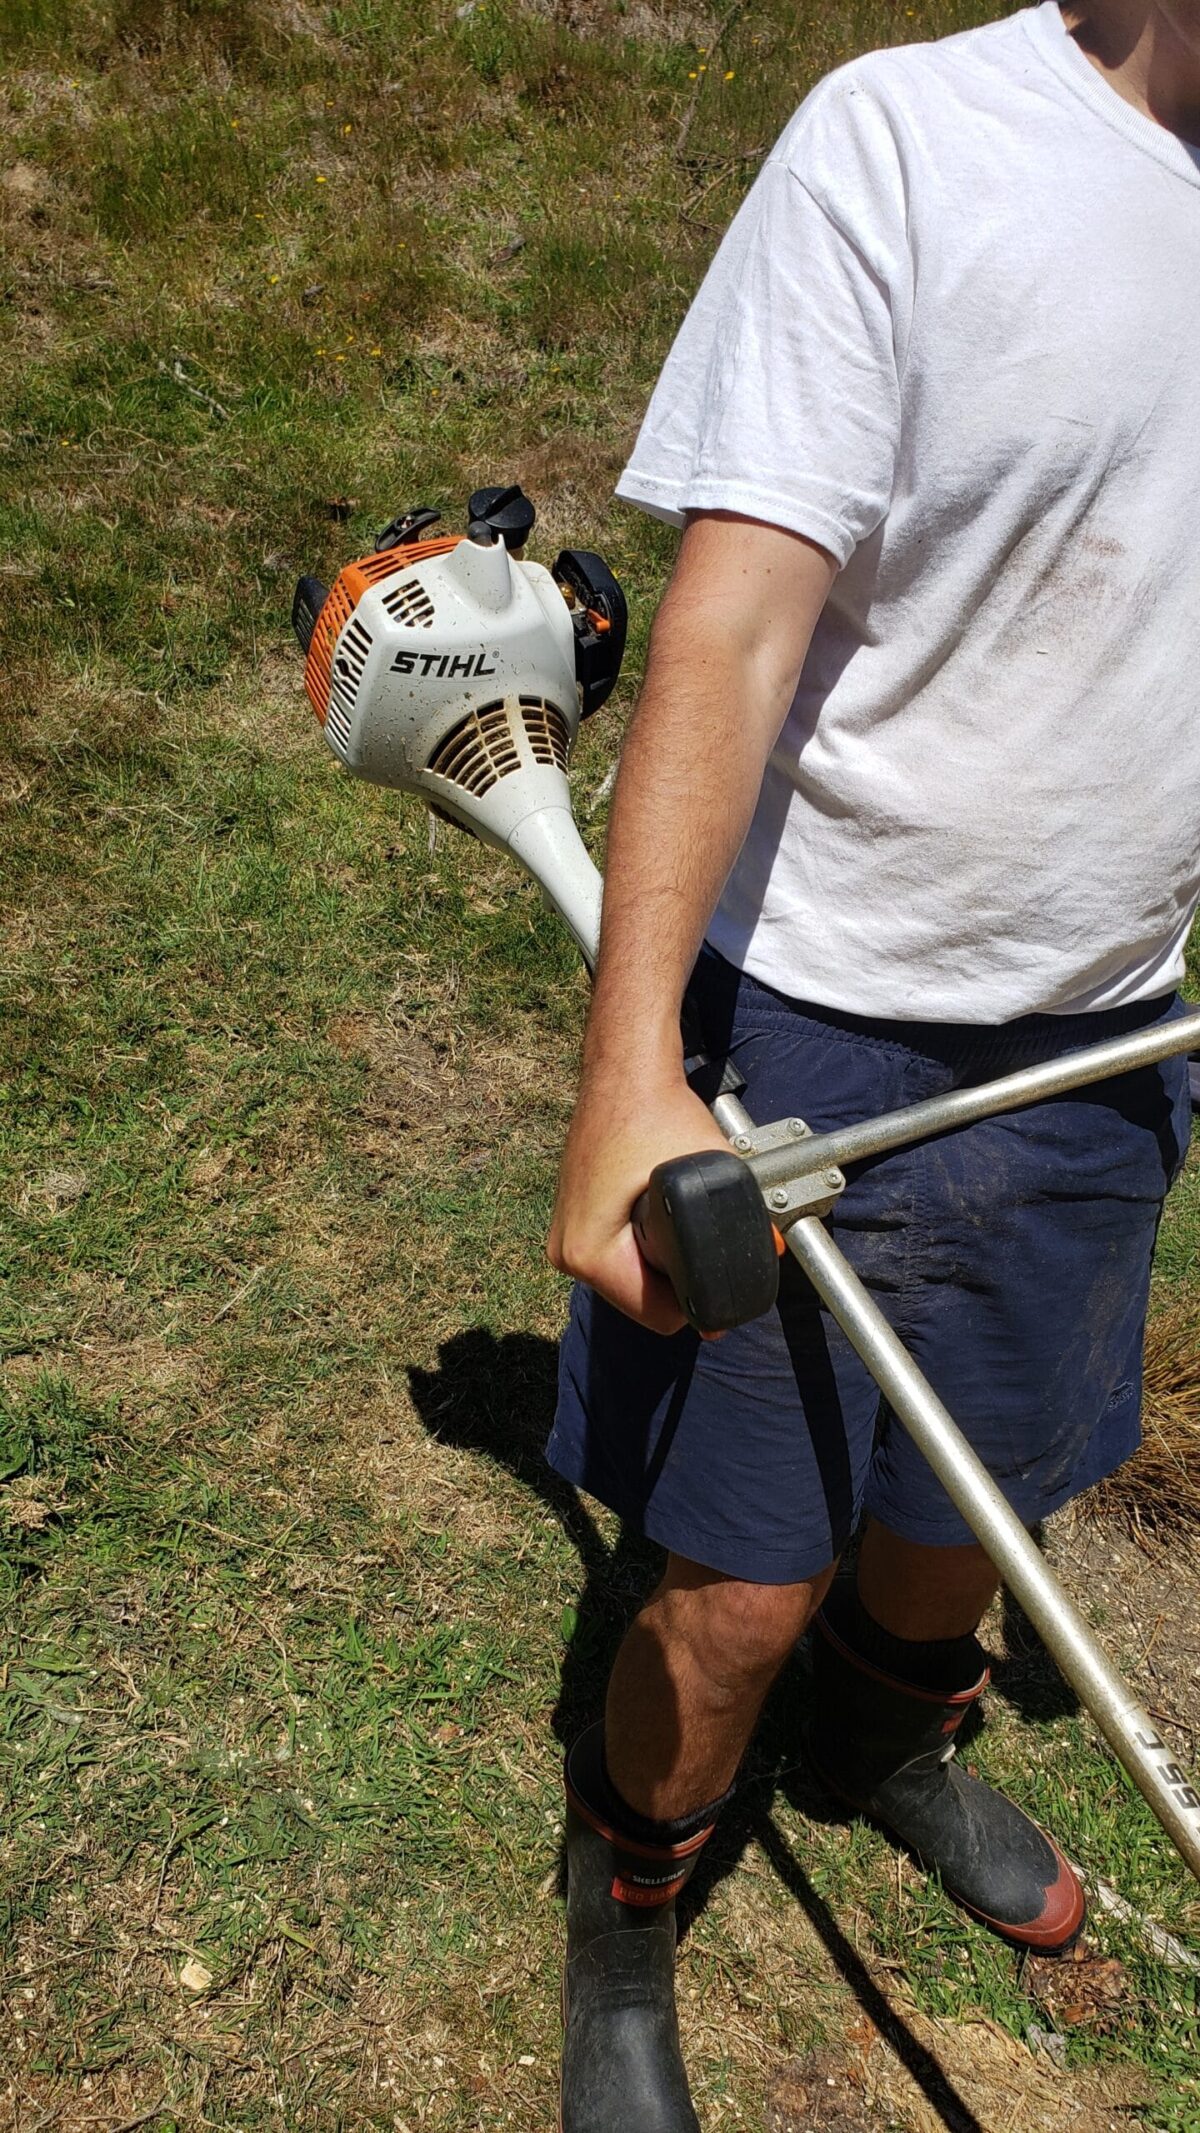 stihl brush cutter review 2022